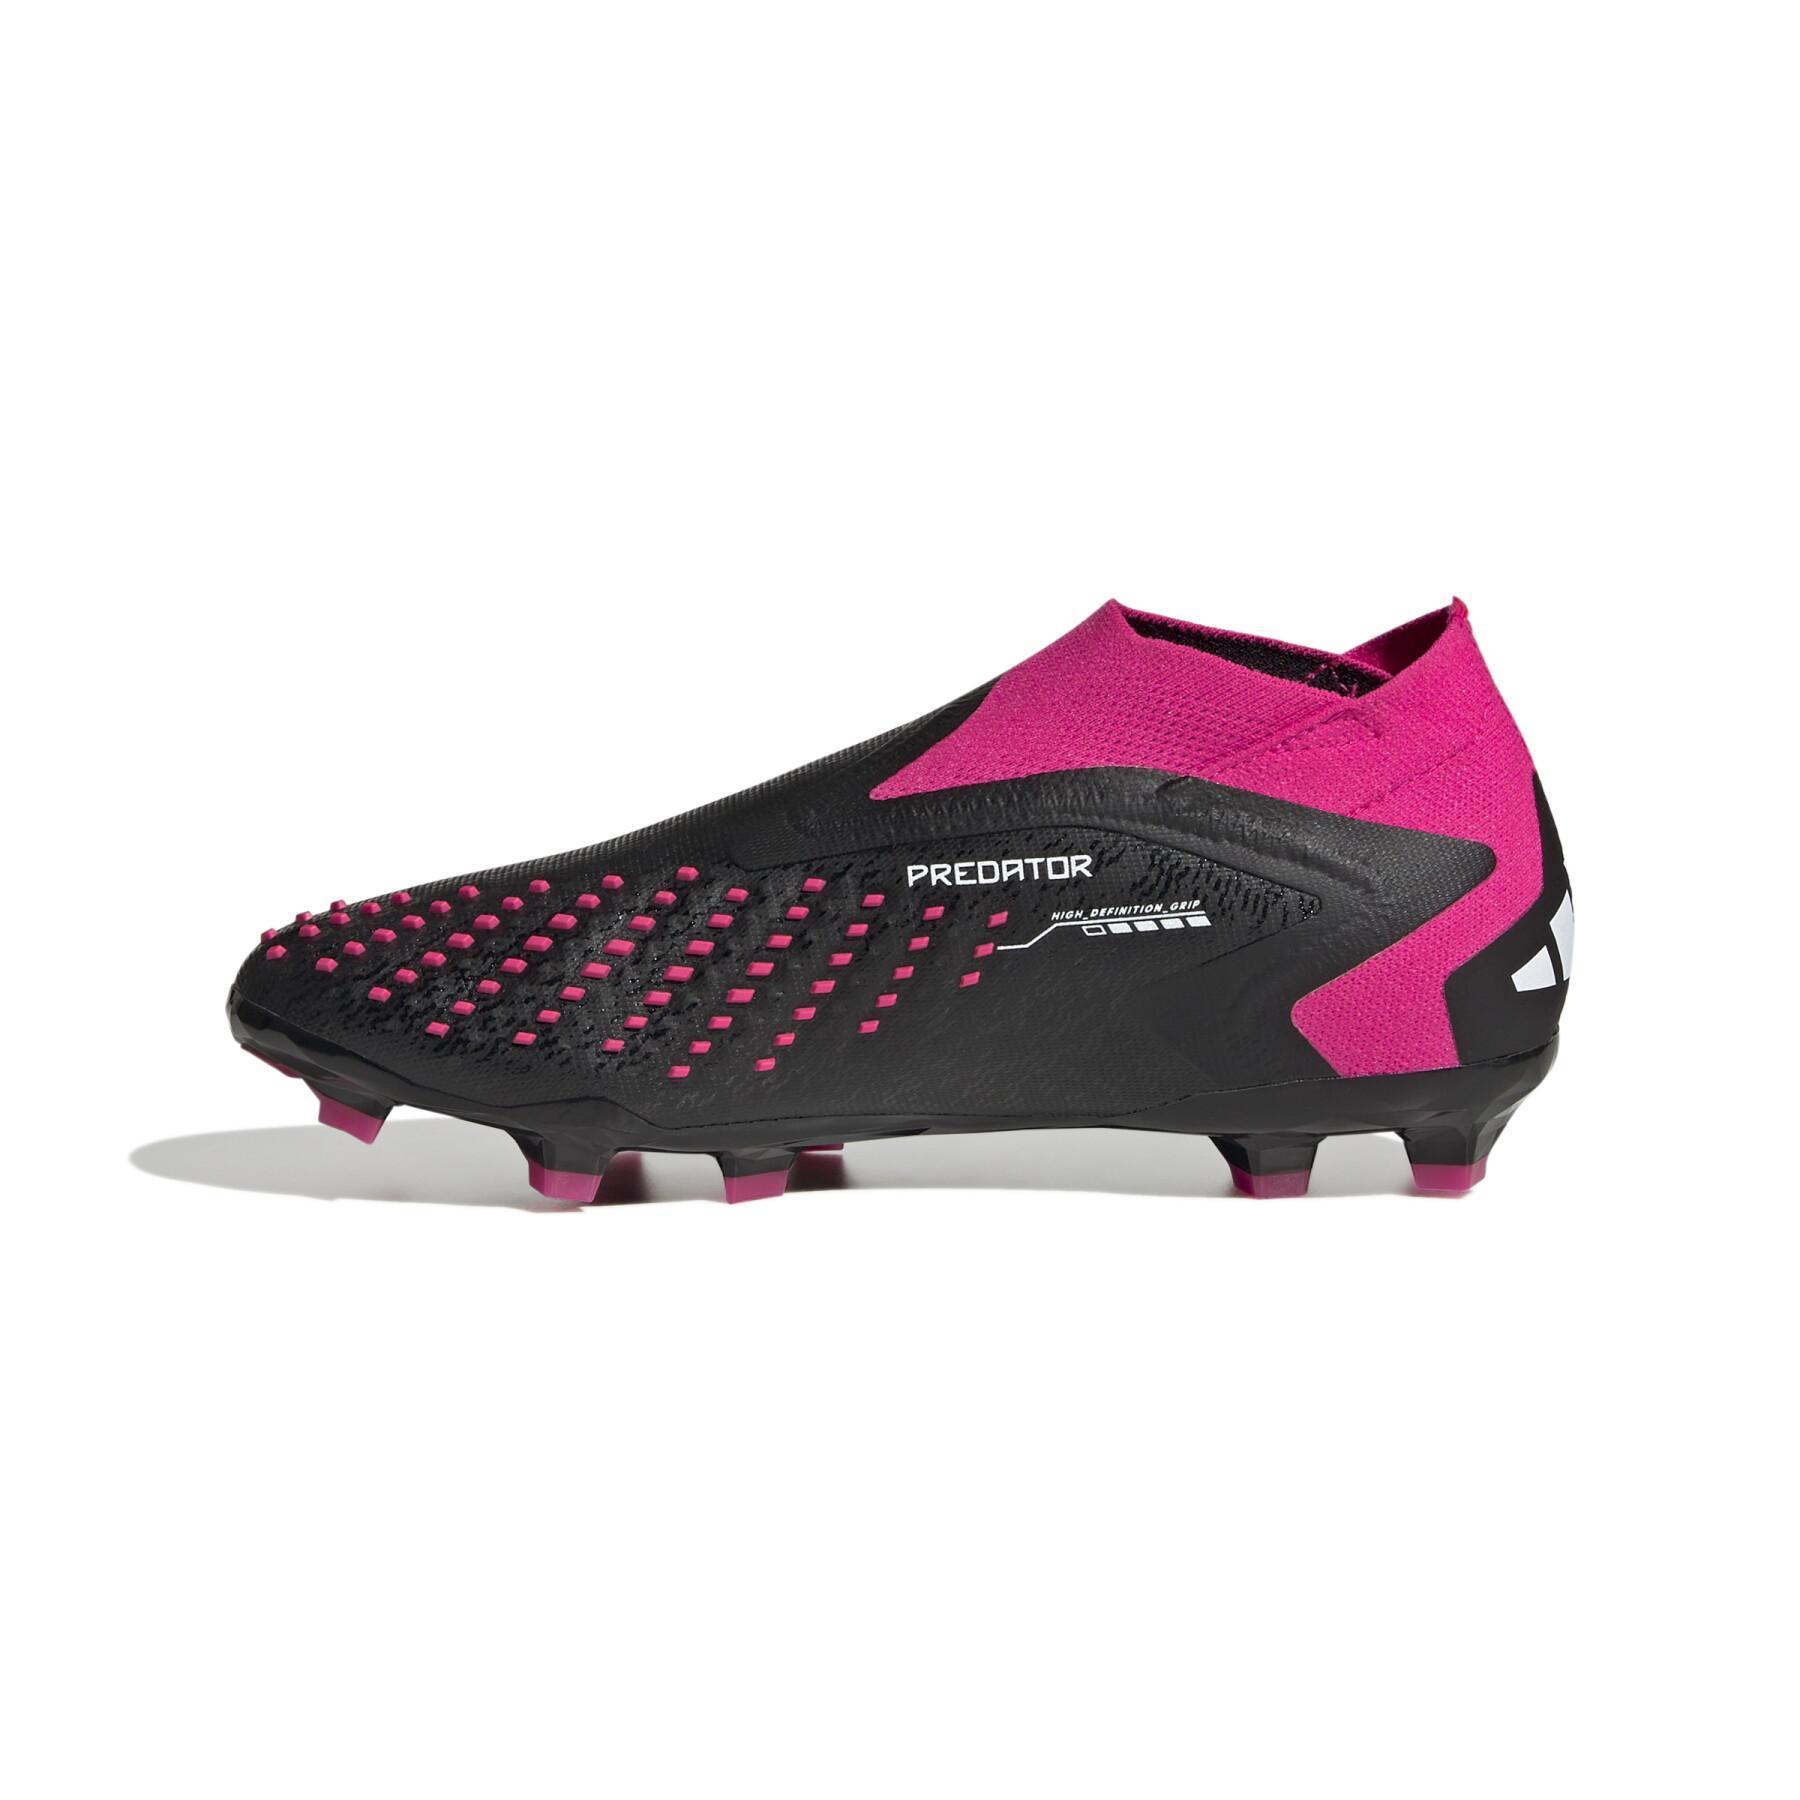 Children's soccer shoes adidas Predator Accuracy+ FG - Own your Football